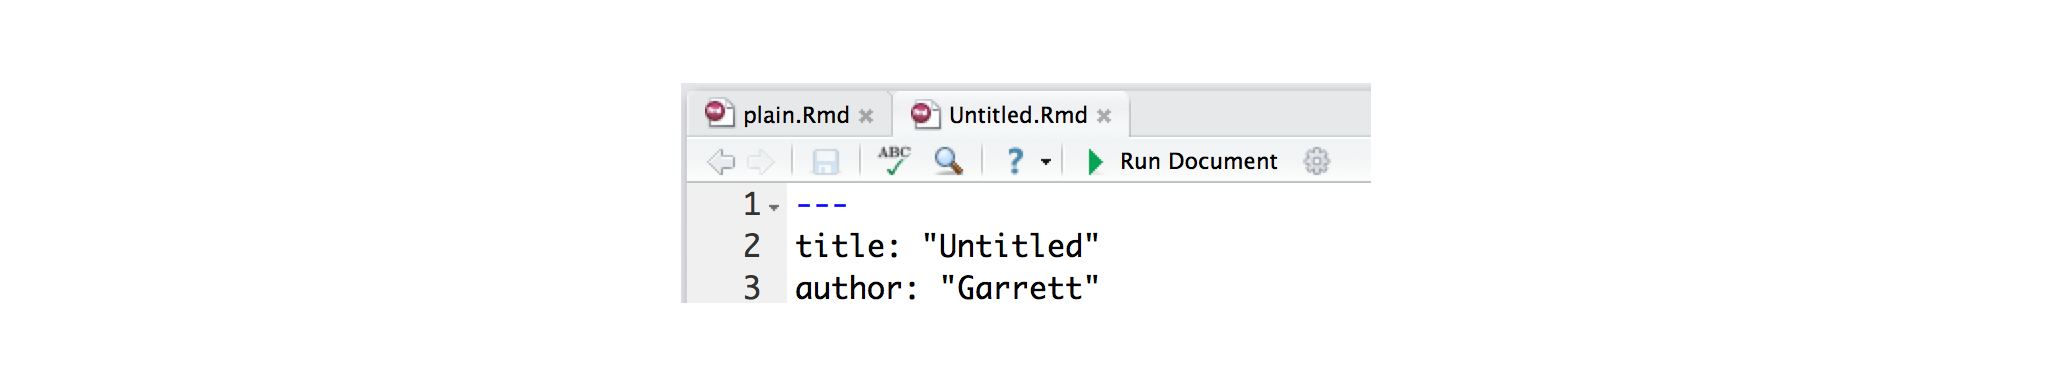 YAML header that includes title and author